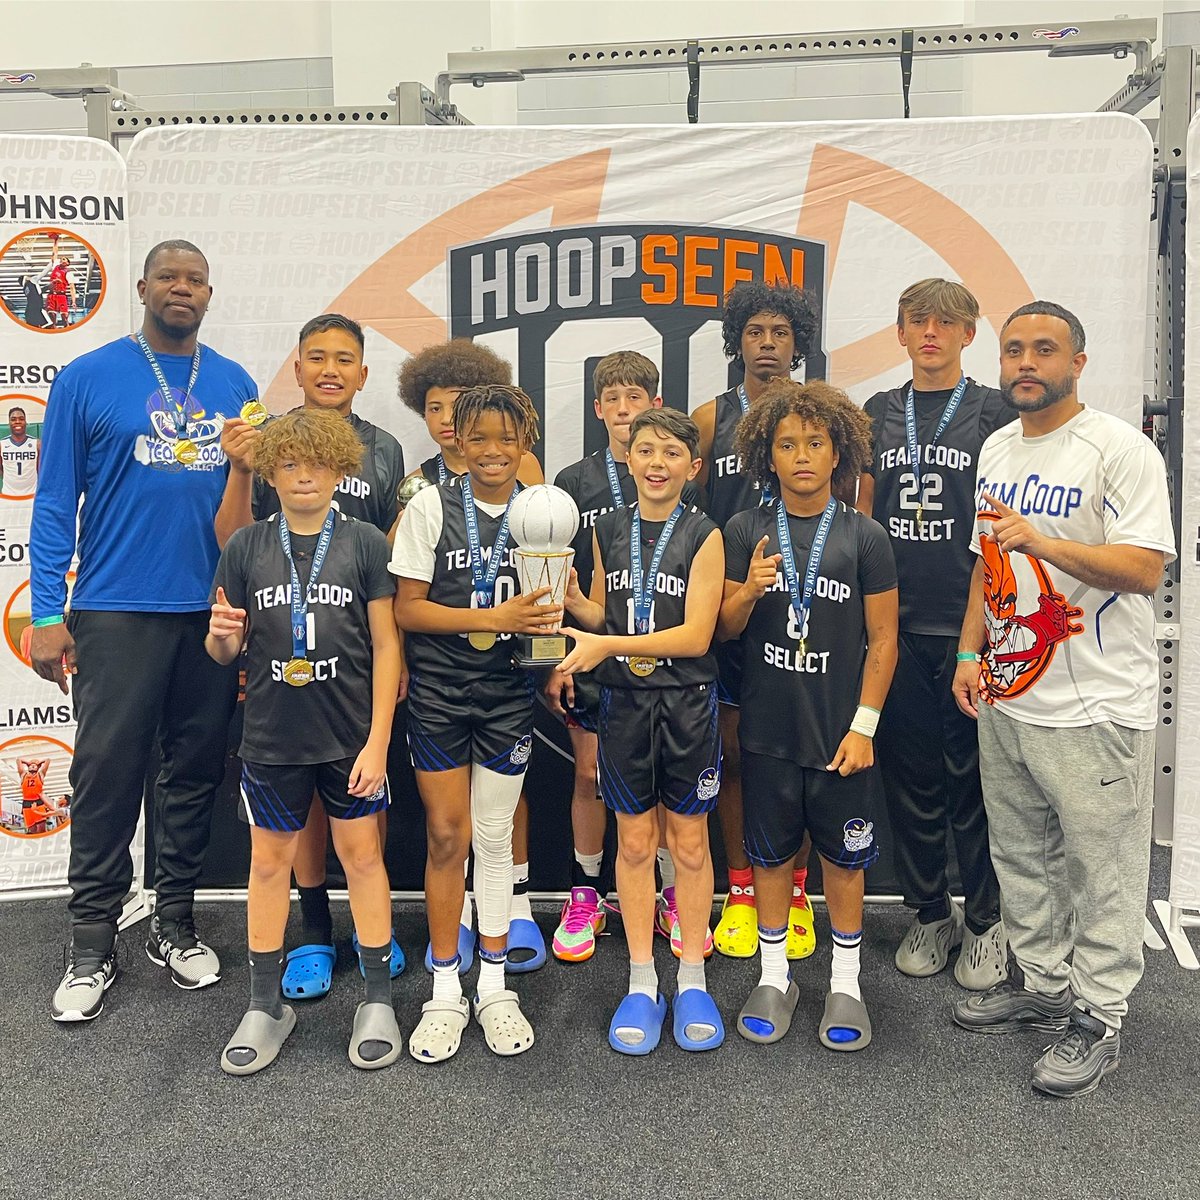 .@Teamcoopselect, your sixth grade winners of the Championship Bracket! 🏆 #FLCup